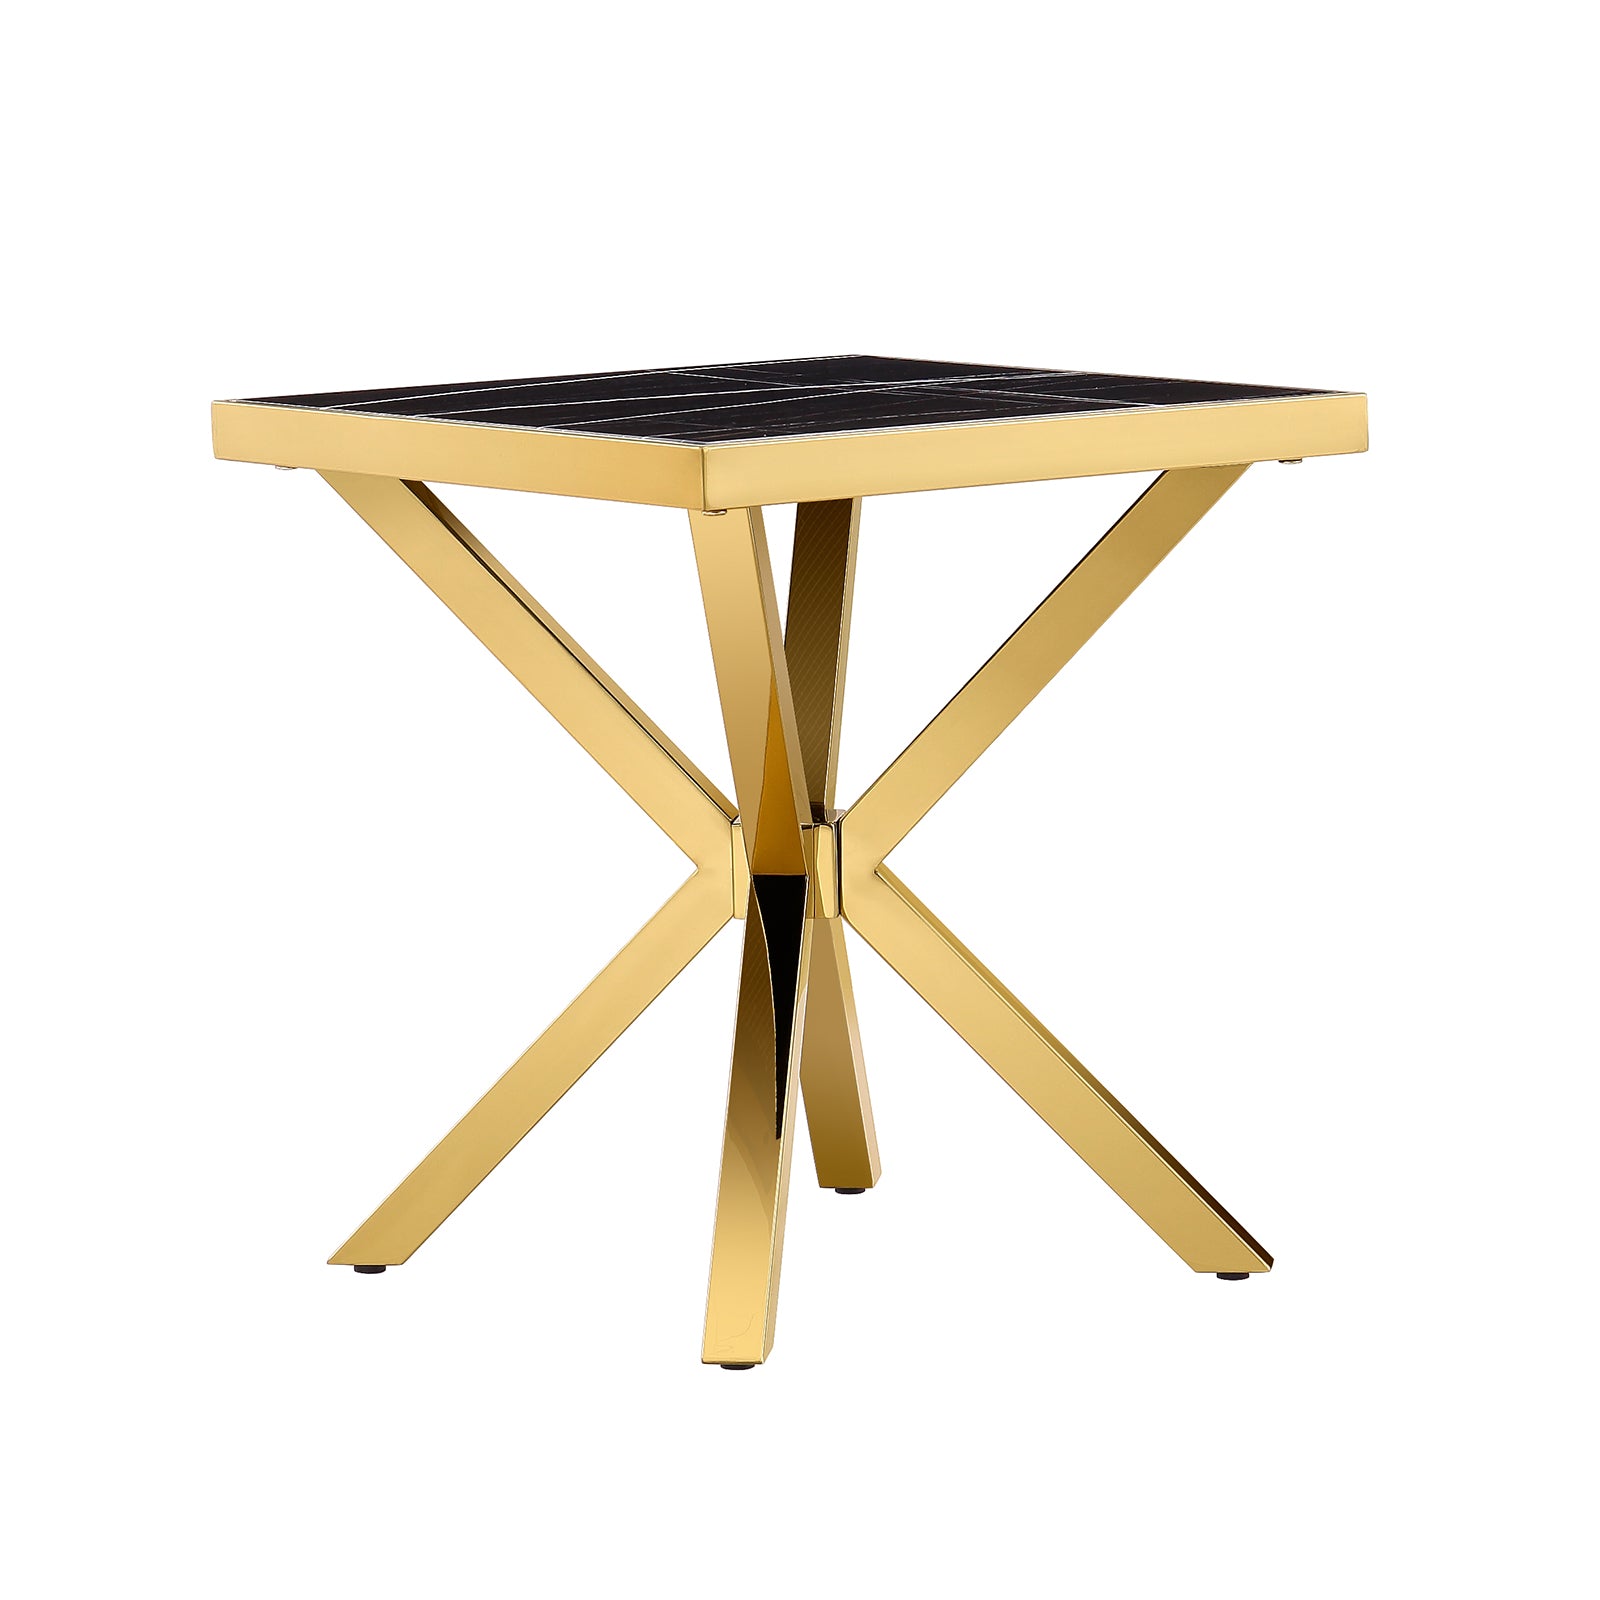 The Black and Gold End Table: A Stylish and Space-Saving Addition to Your Home